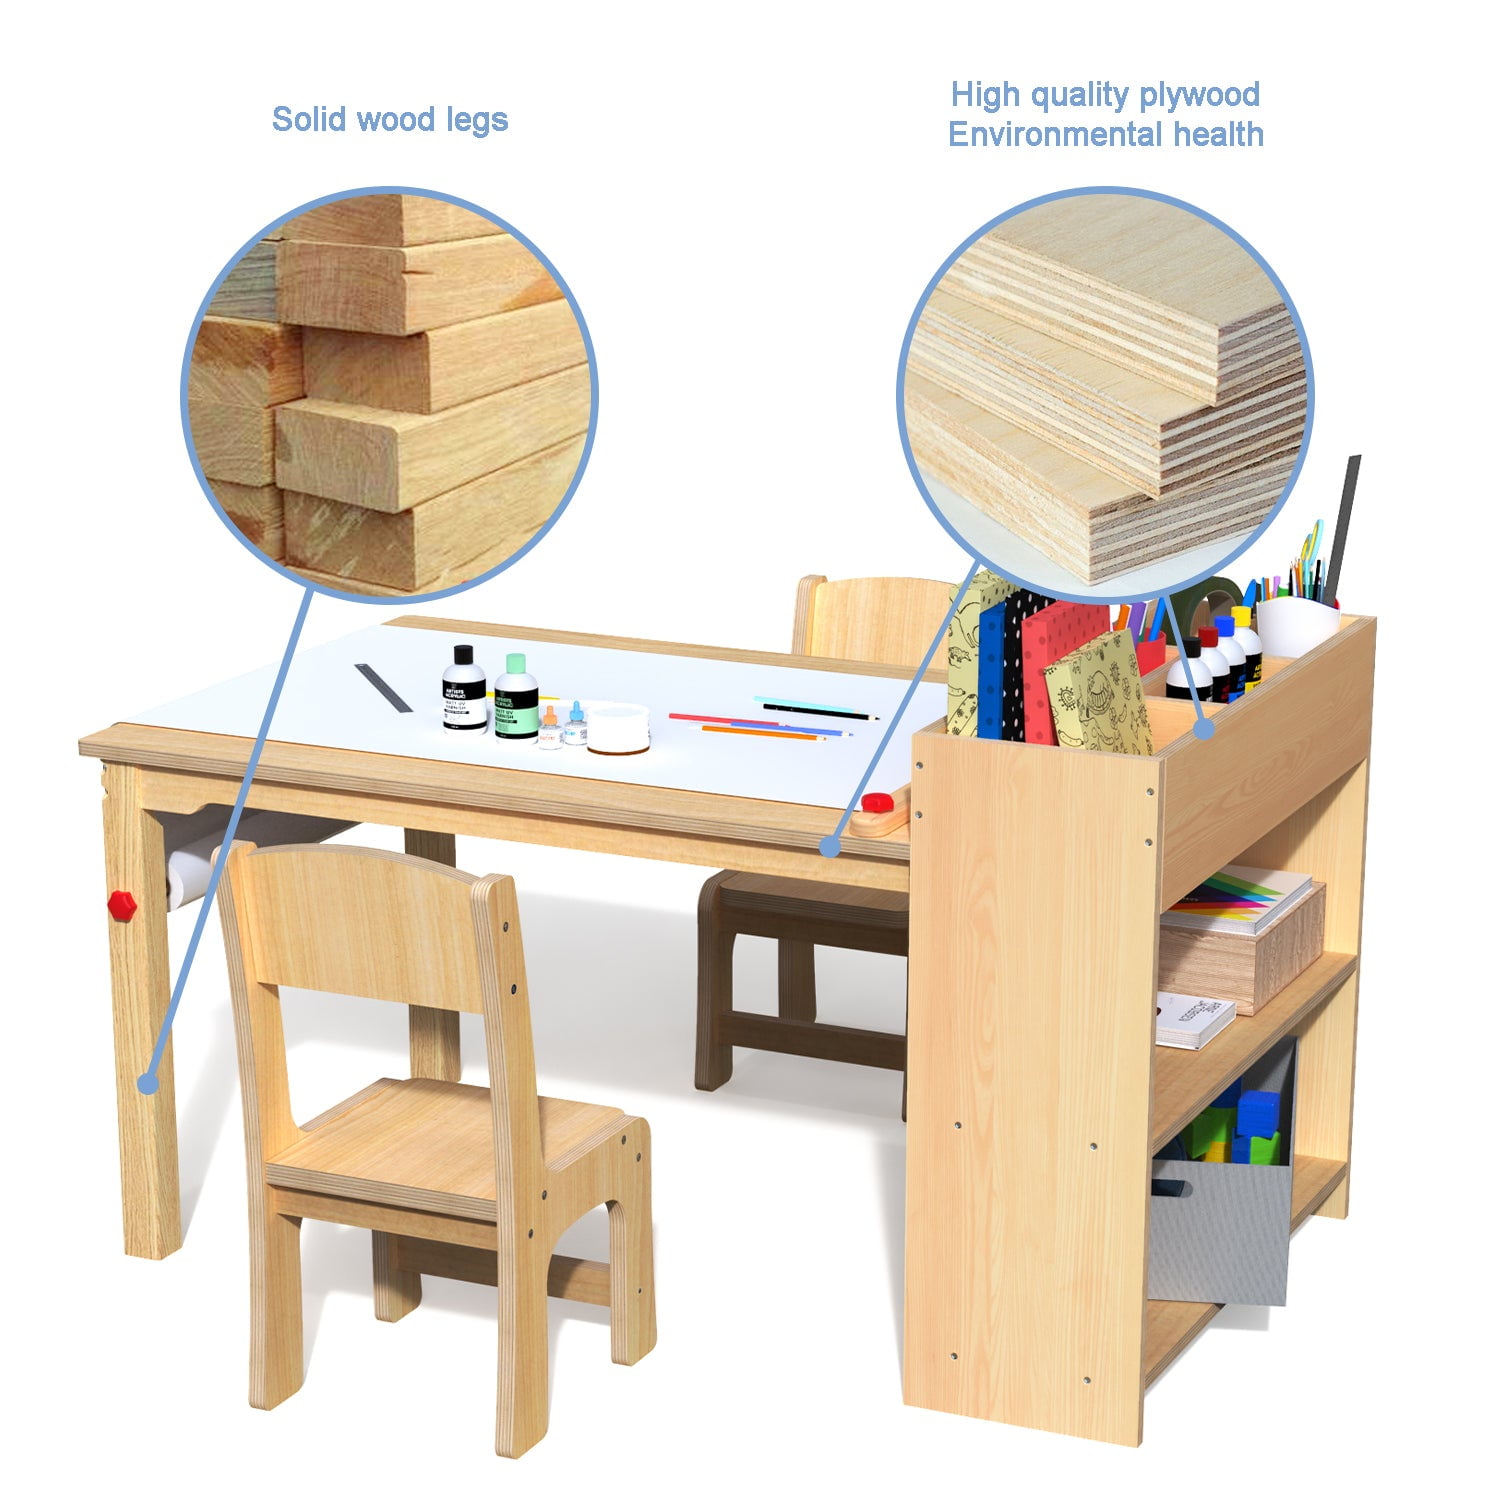 GDLF Kids Art Table and 2 Chairs, Wooden Drawing Desk, Activity & Crafts,  Children's Furniture, 42x23 